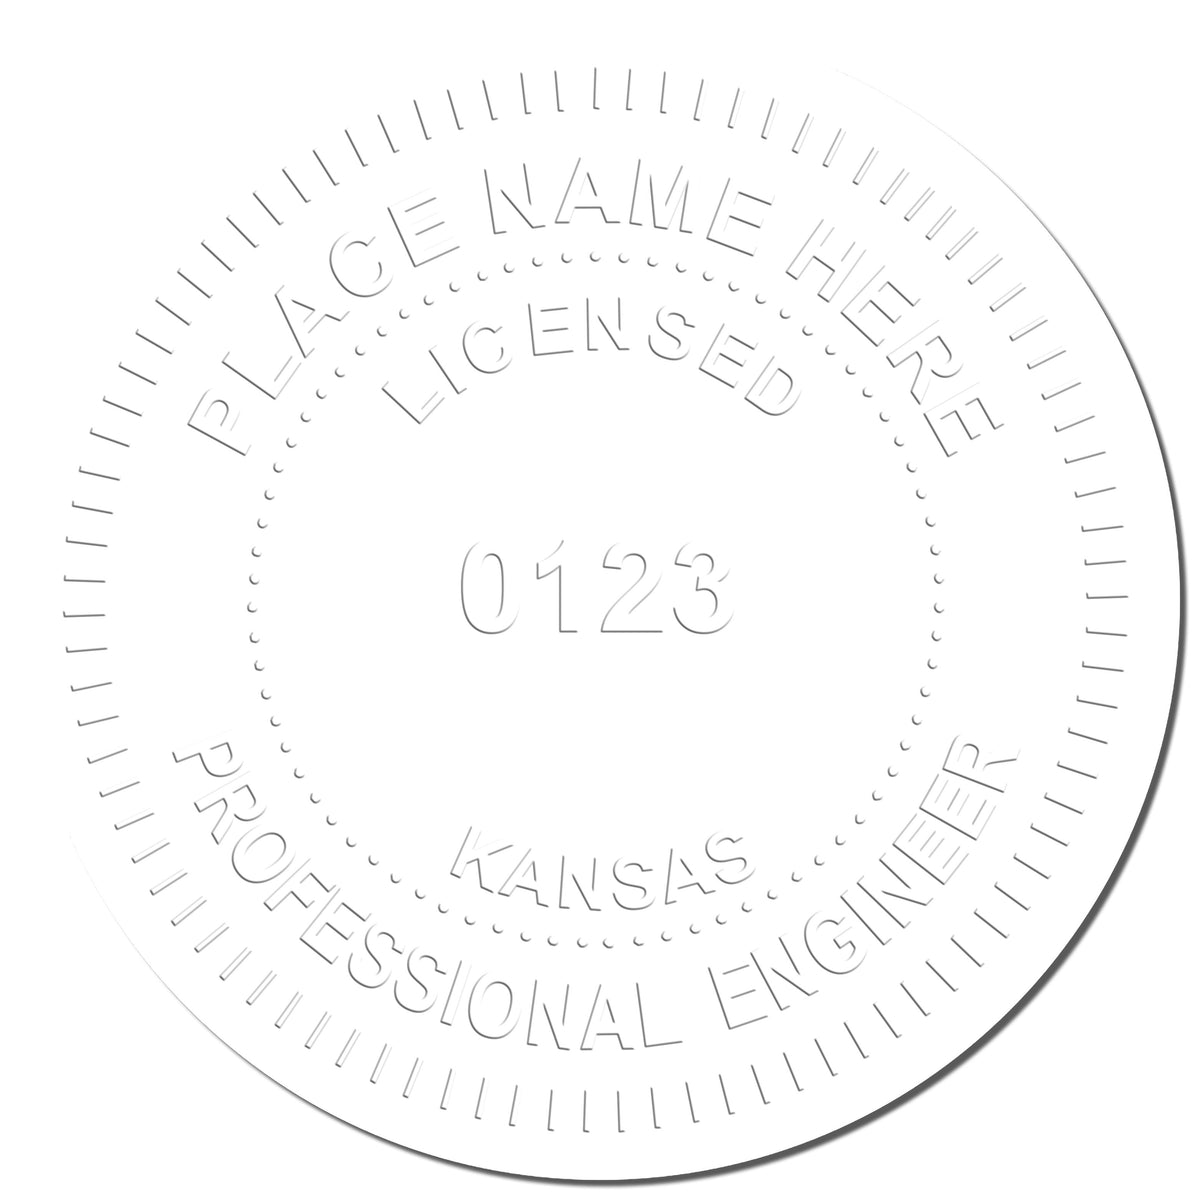 The Soft Kansas Professional Engineer Seal stamp impression comes to life with a crisp, detailed photo on paper - showcasing true professional quality.